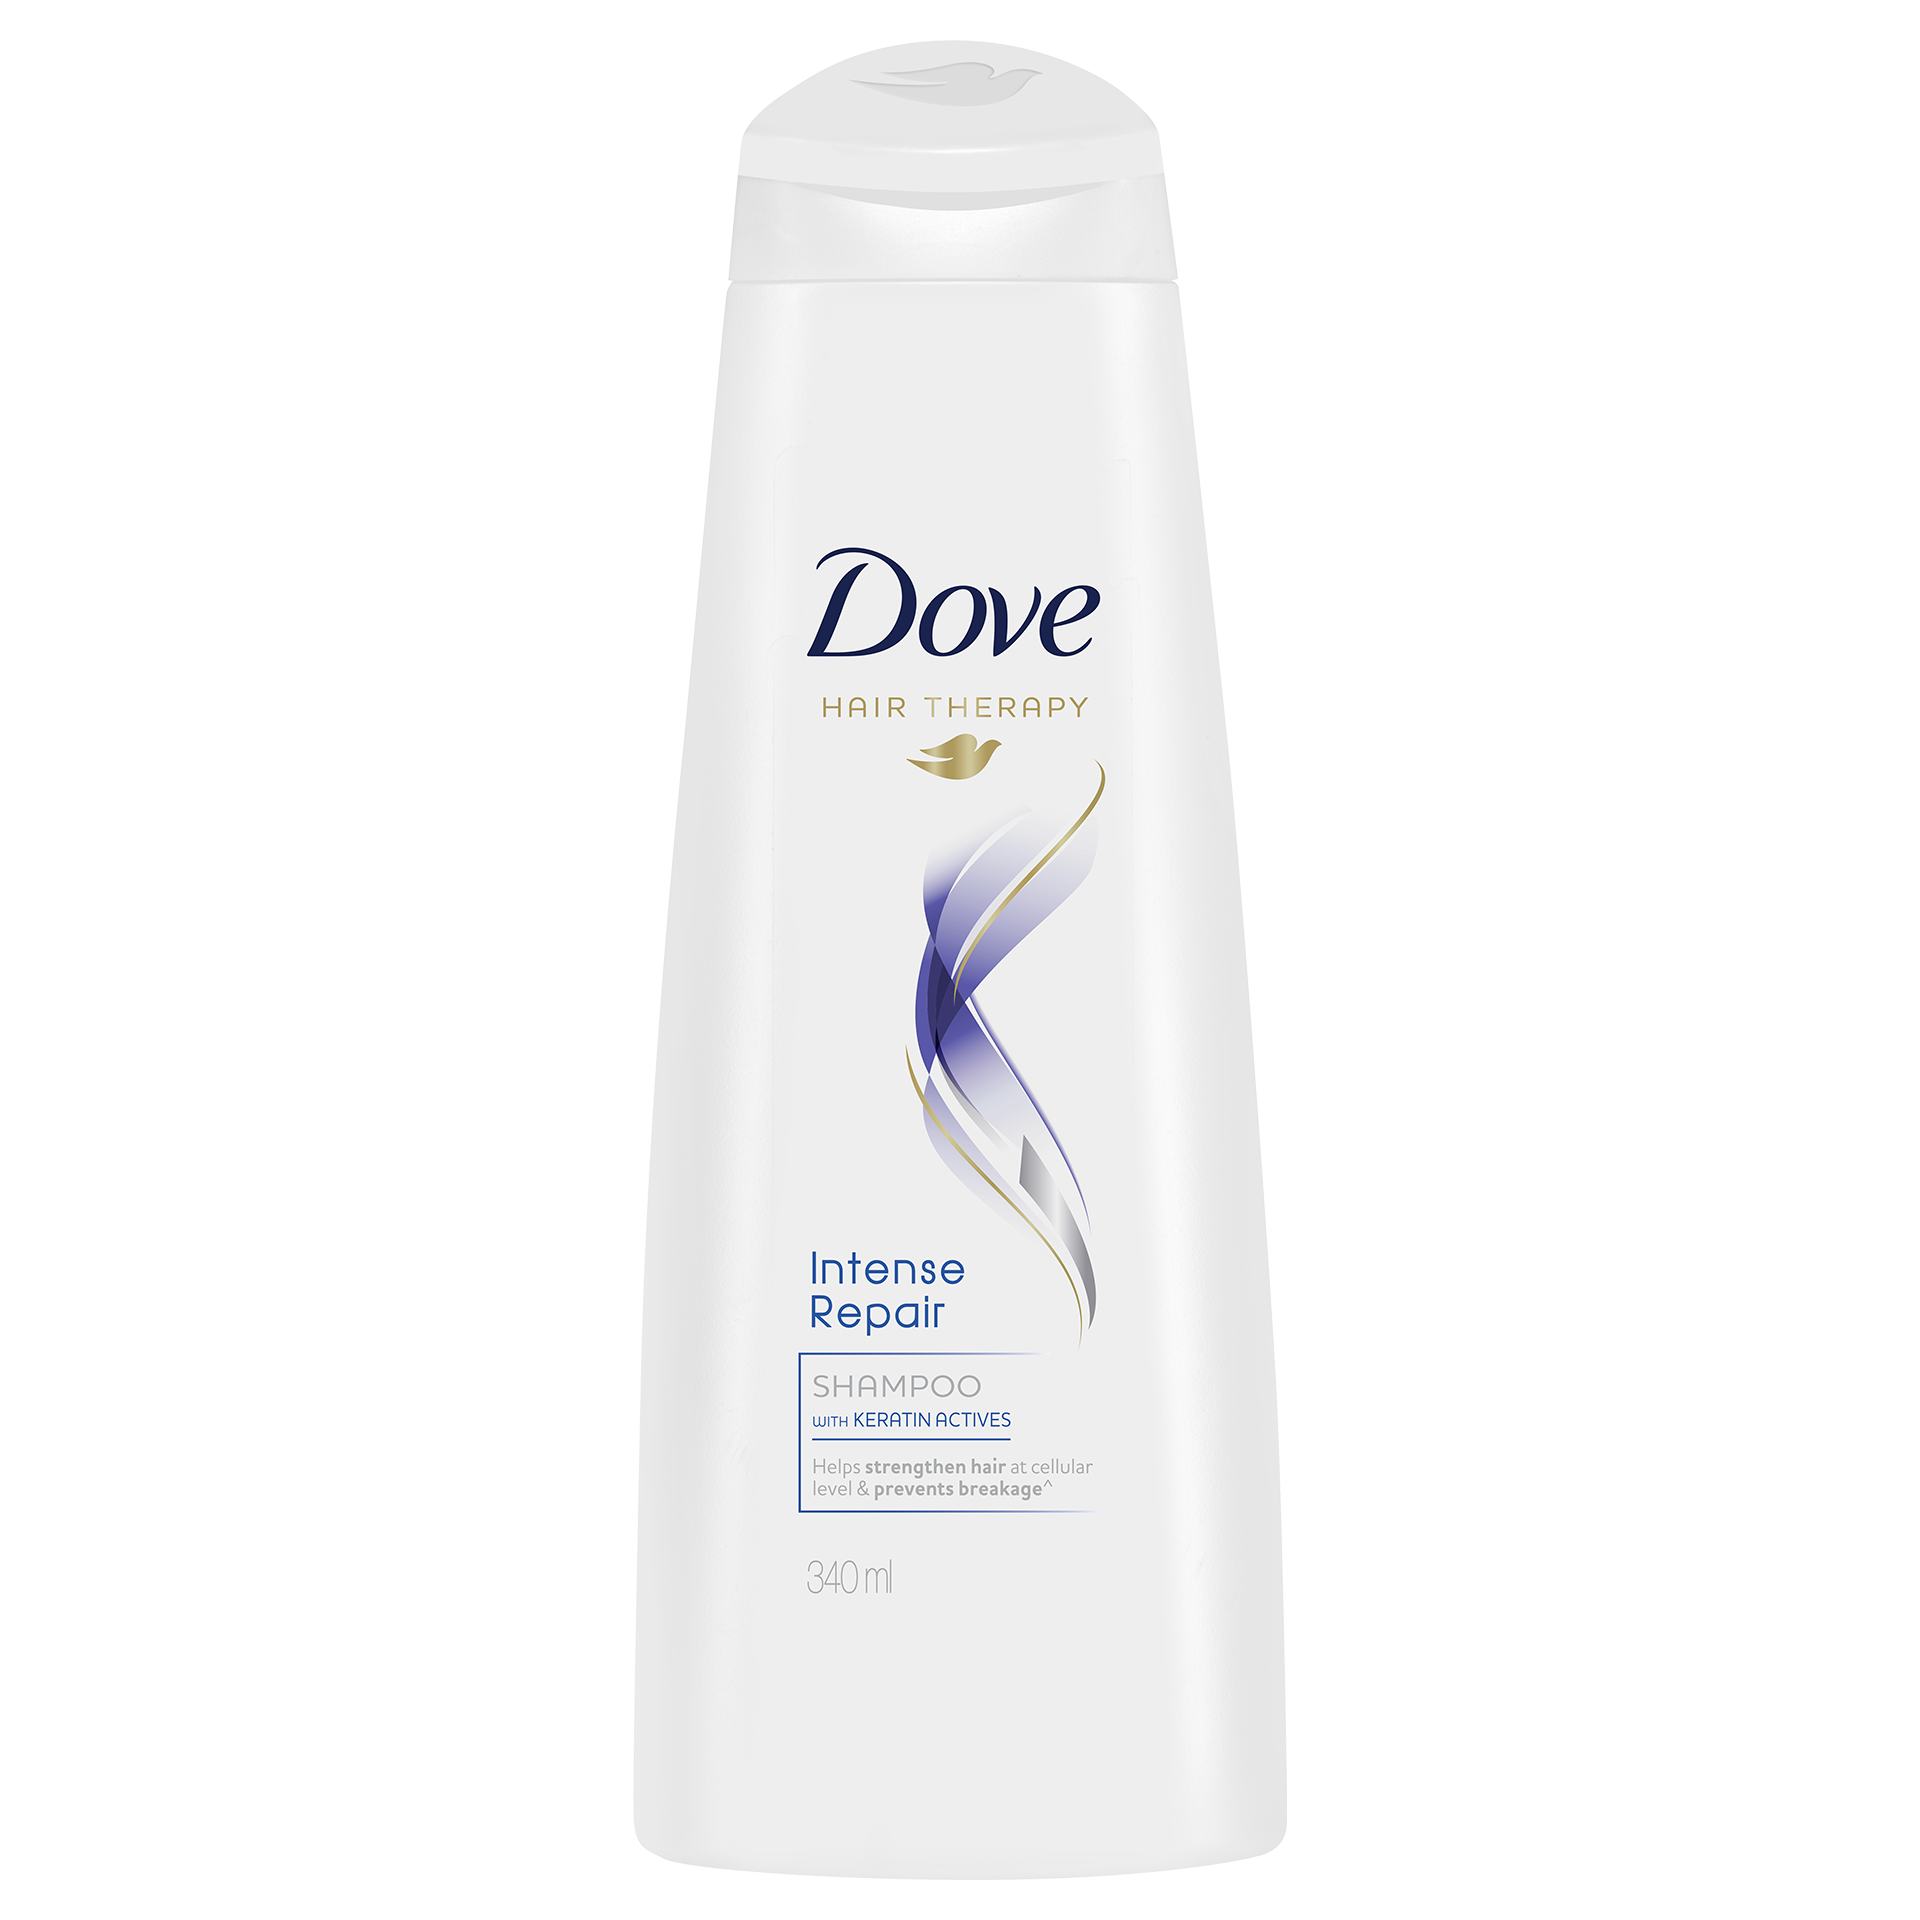 Highly concentrated shampoo f